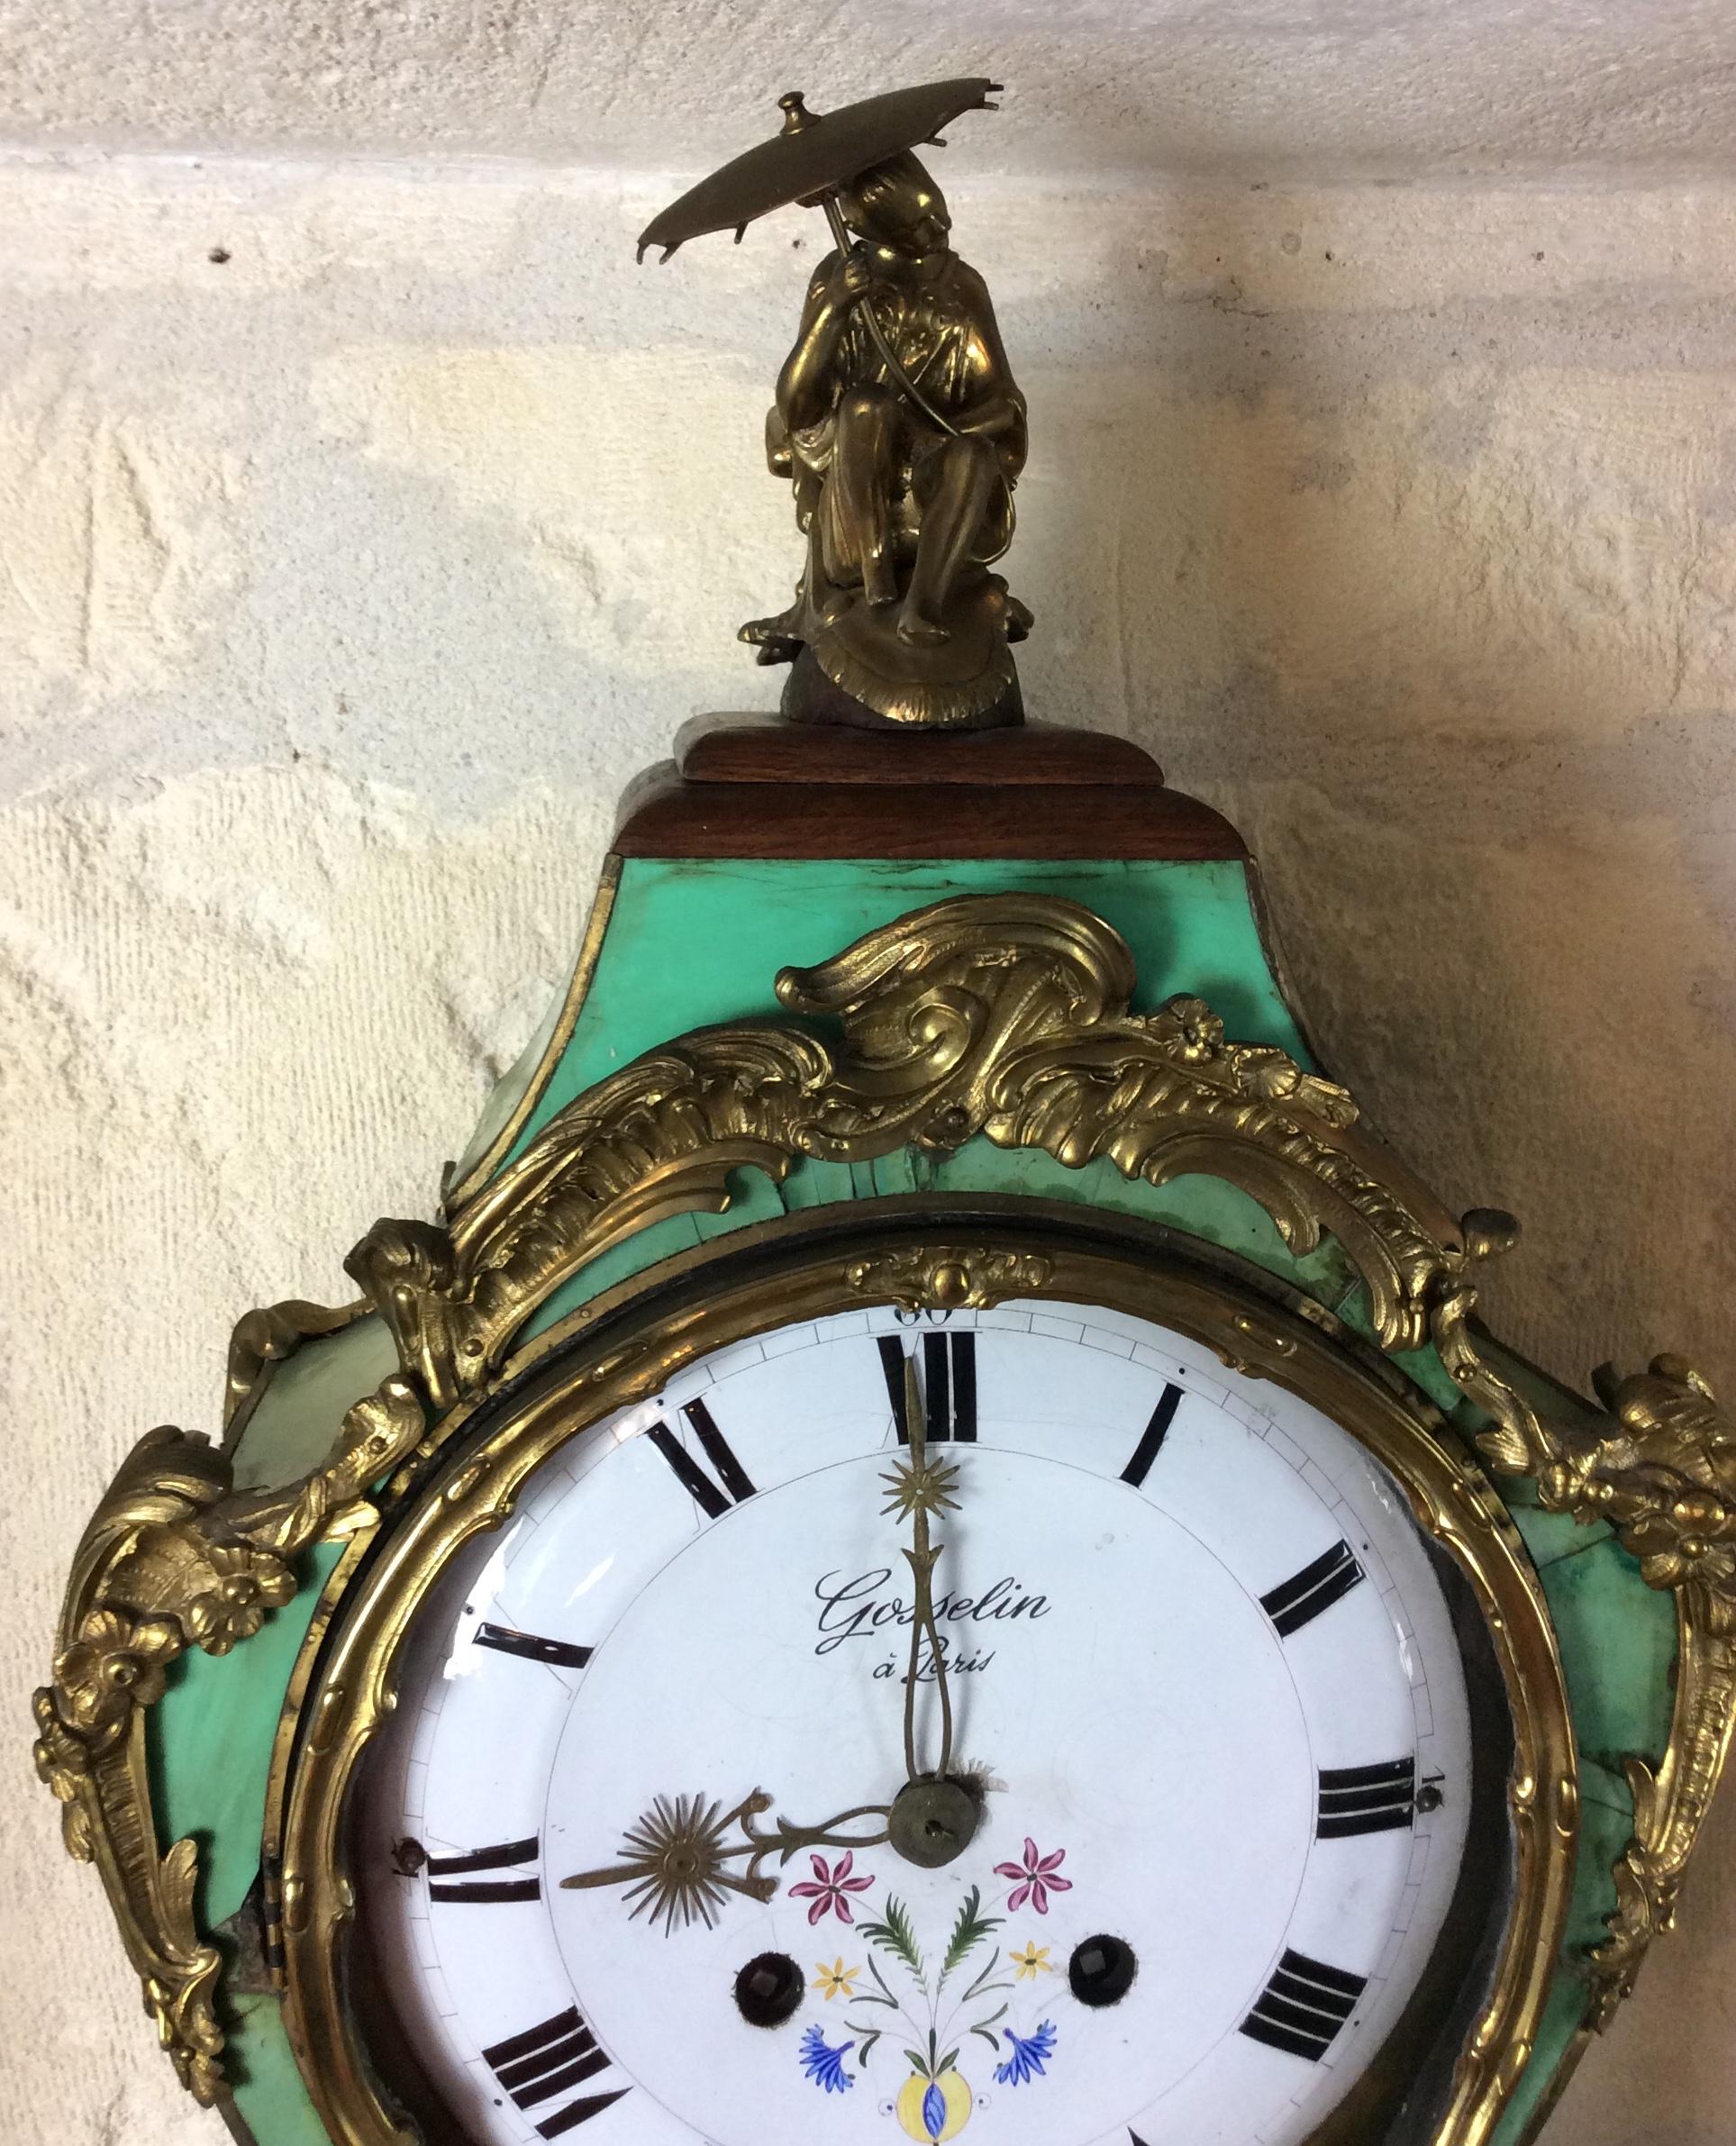 A very fine Early 18th century French Louis XV period corne verte (green horn) and ormolu mounted cartel or wall clock. The impressive cartel rests on its original socle - wall mounted base. Signed on the original white enamel dial with hand painted